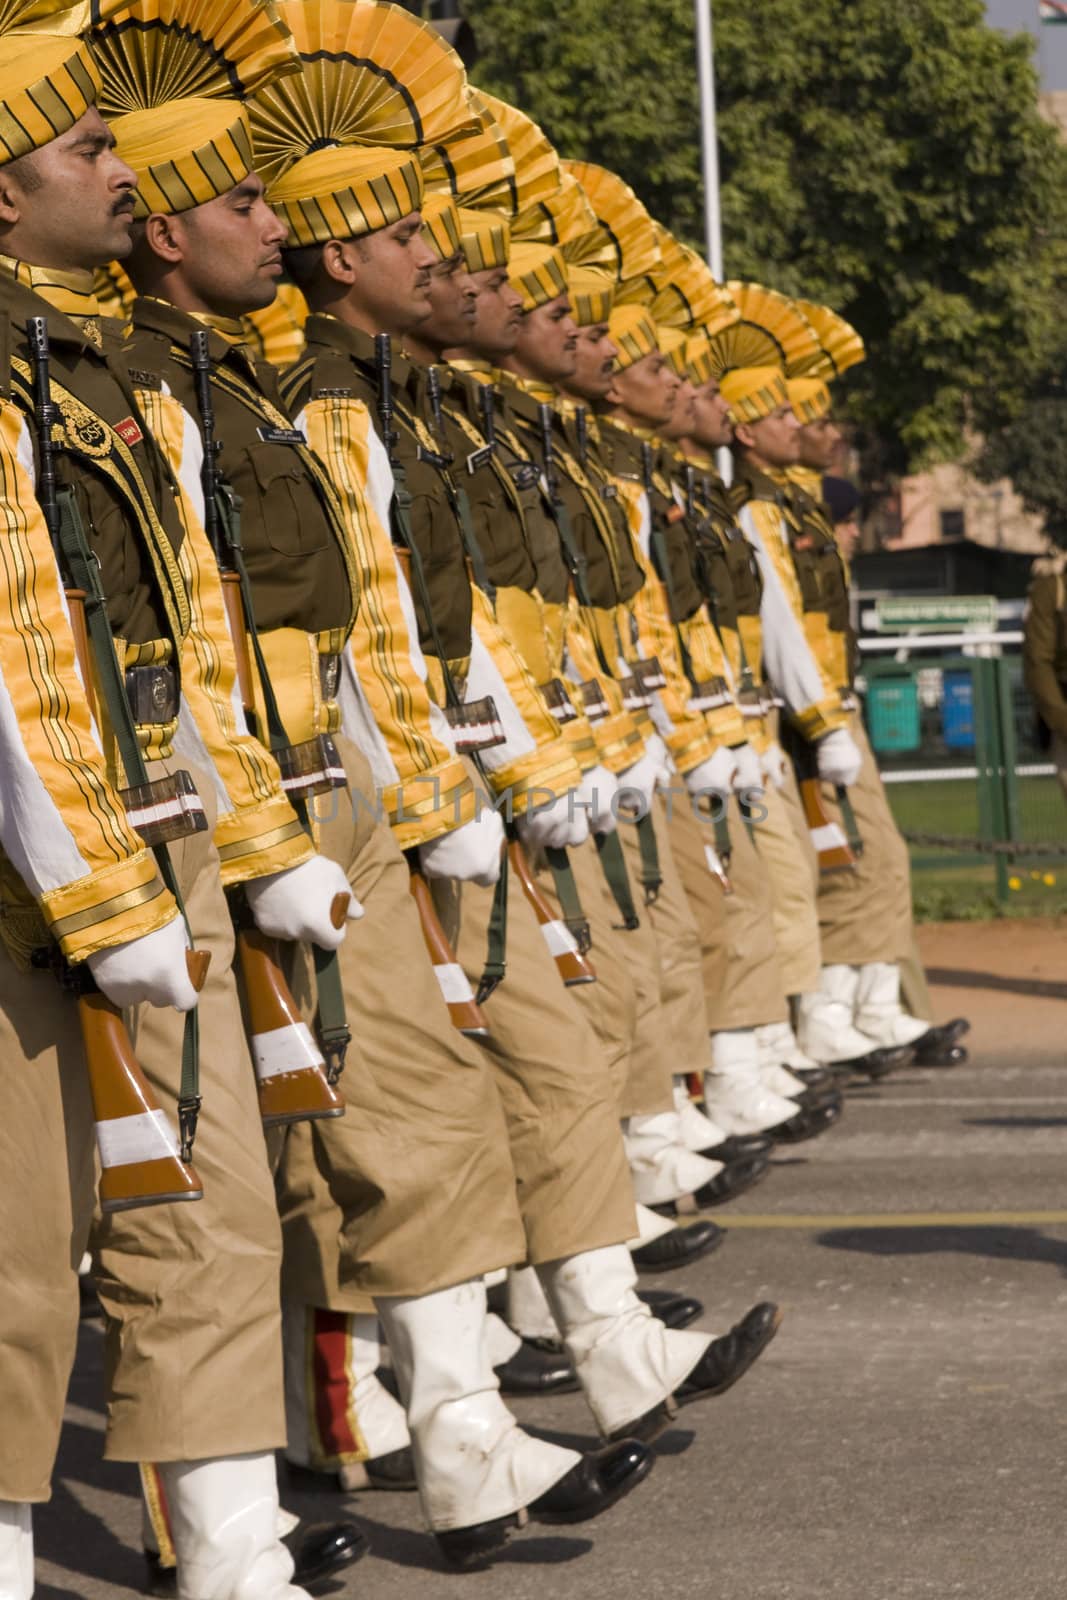 Soldiers in bright yellow trim parading down the Raj Path in preparation for the Republic Day Parade, New Delhi, India